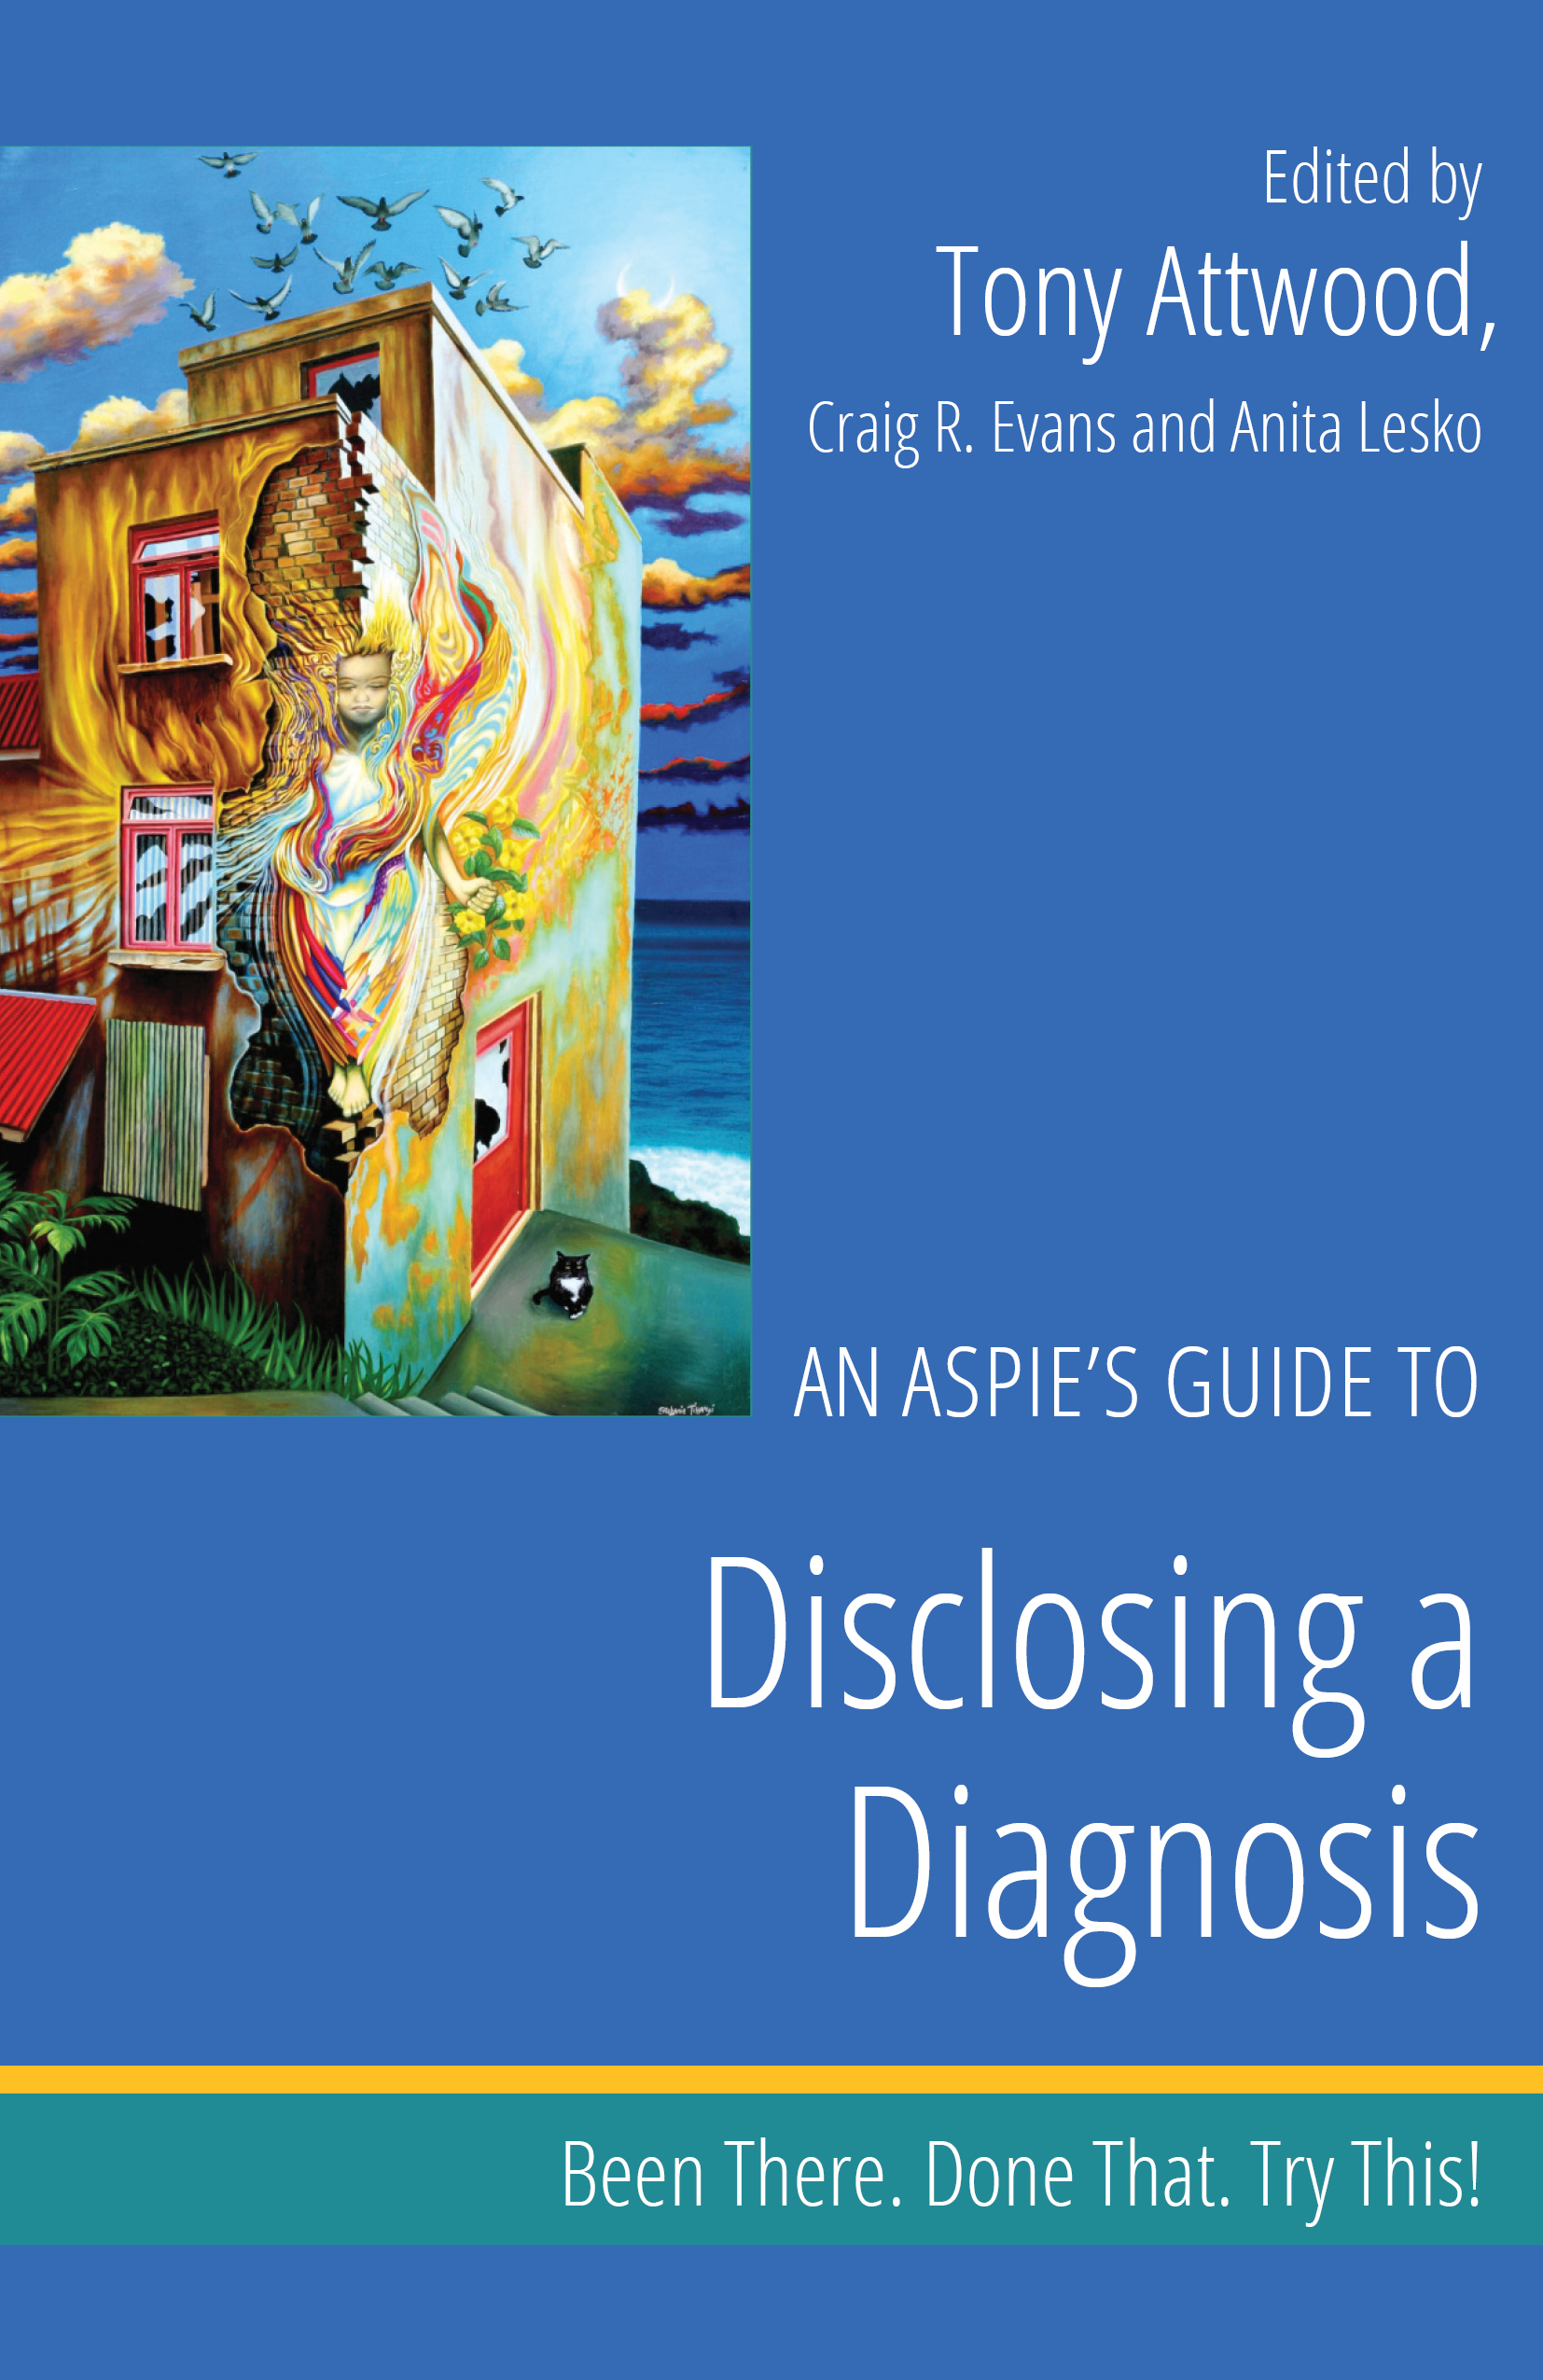 An Aspie's Guide to Disclosing a Diagnosis